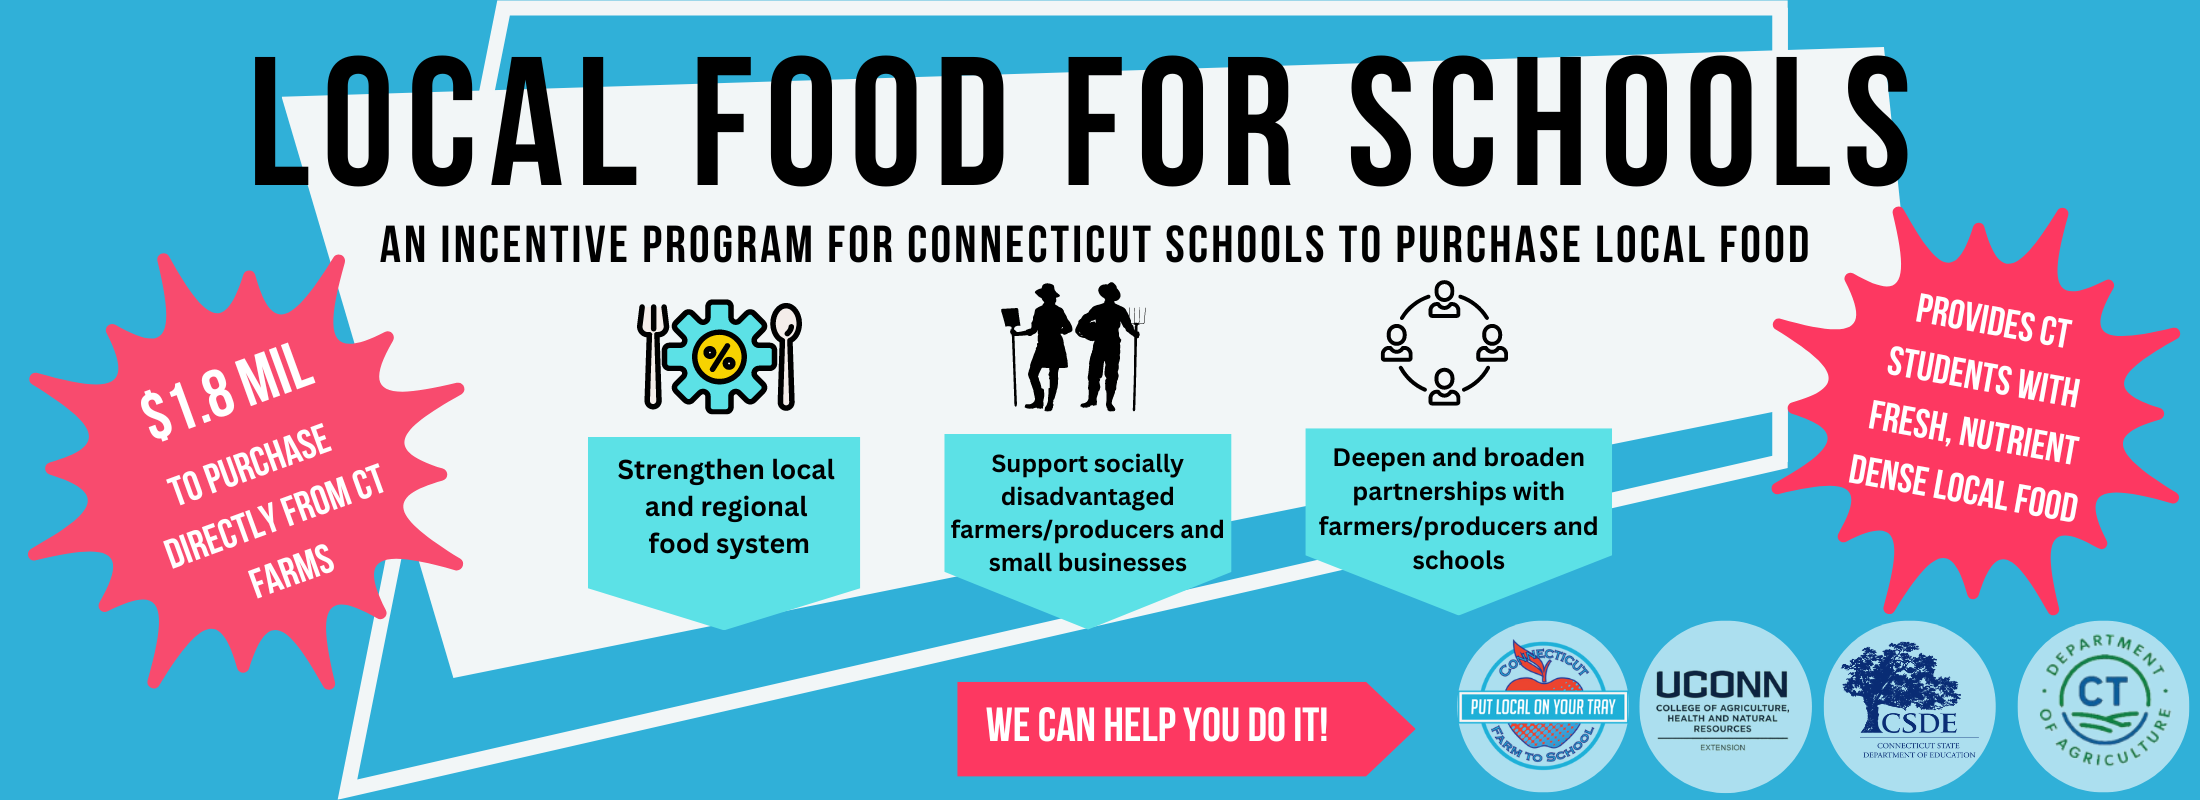 Local Food For Schools Banner